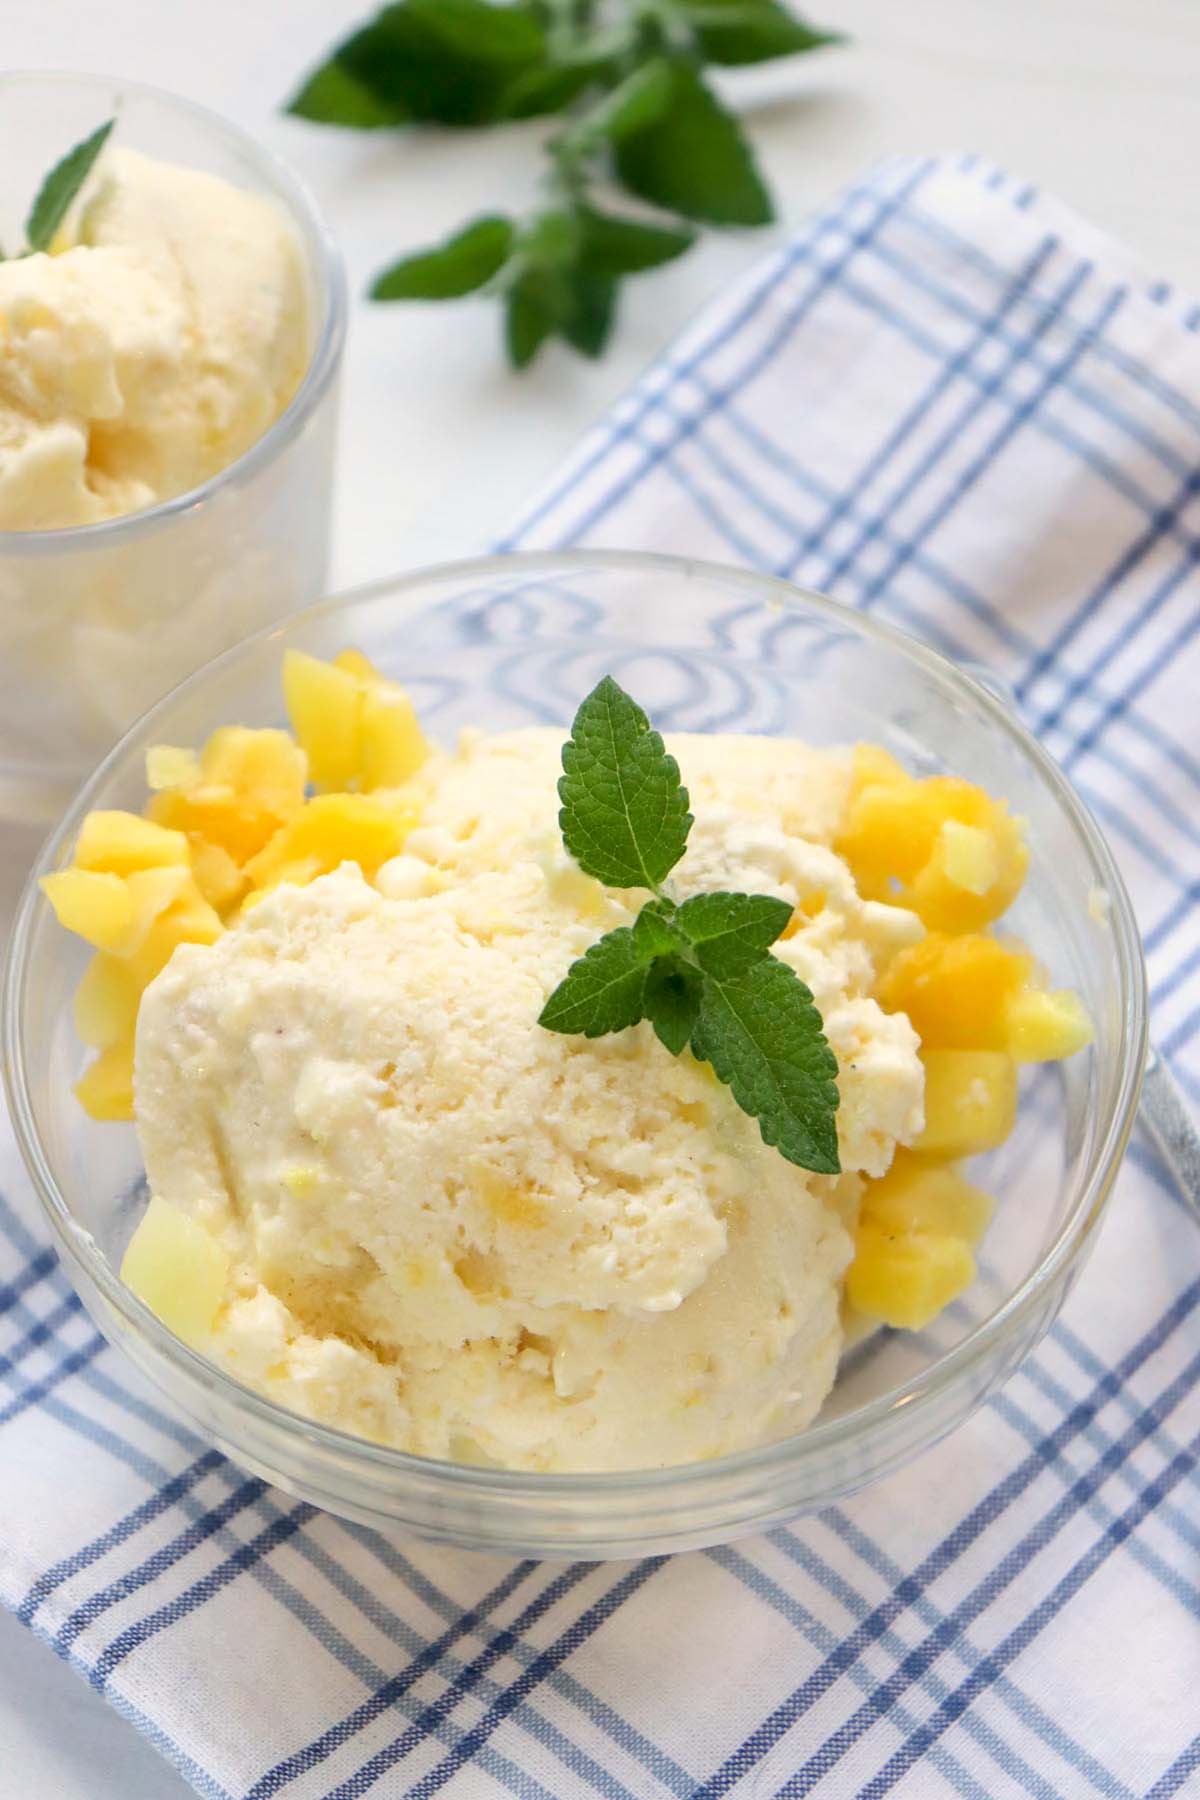 Nice cream in a bowl topped with chopped mango.